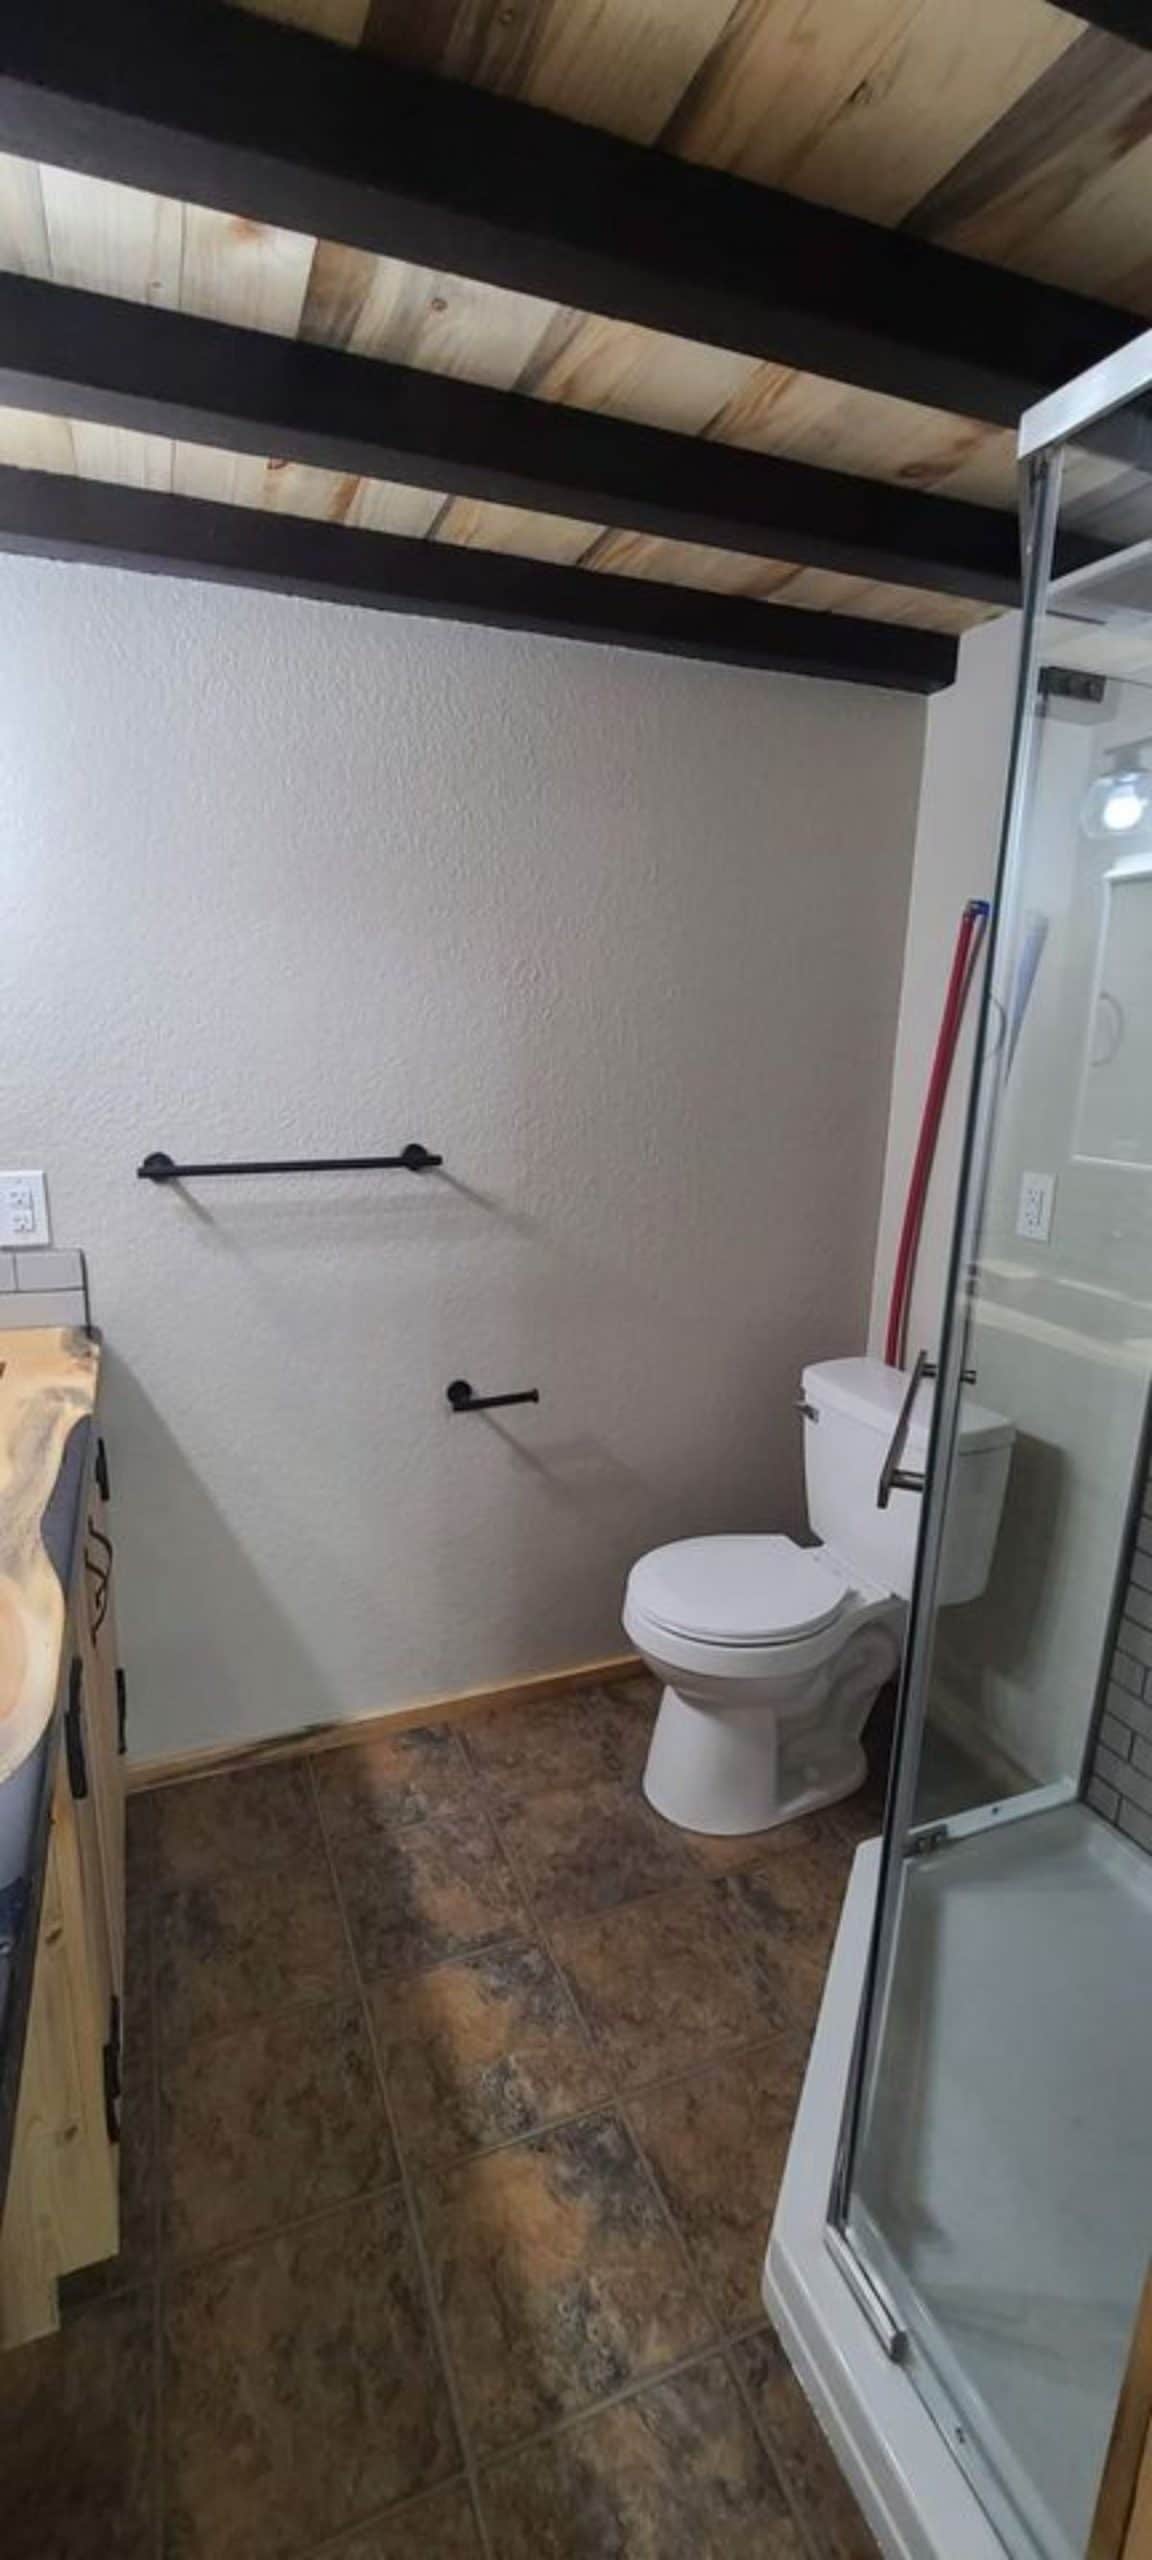 toilet against white wall with glass wall shower